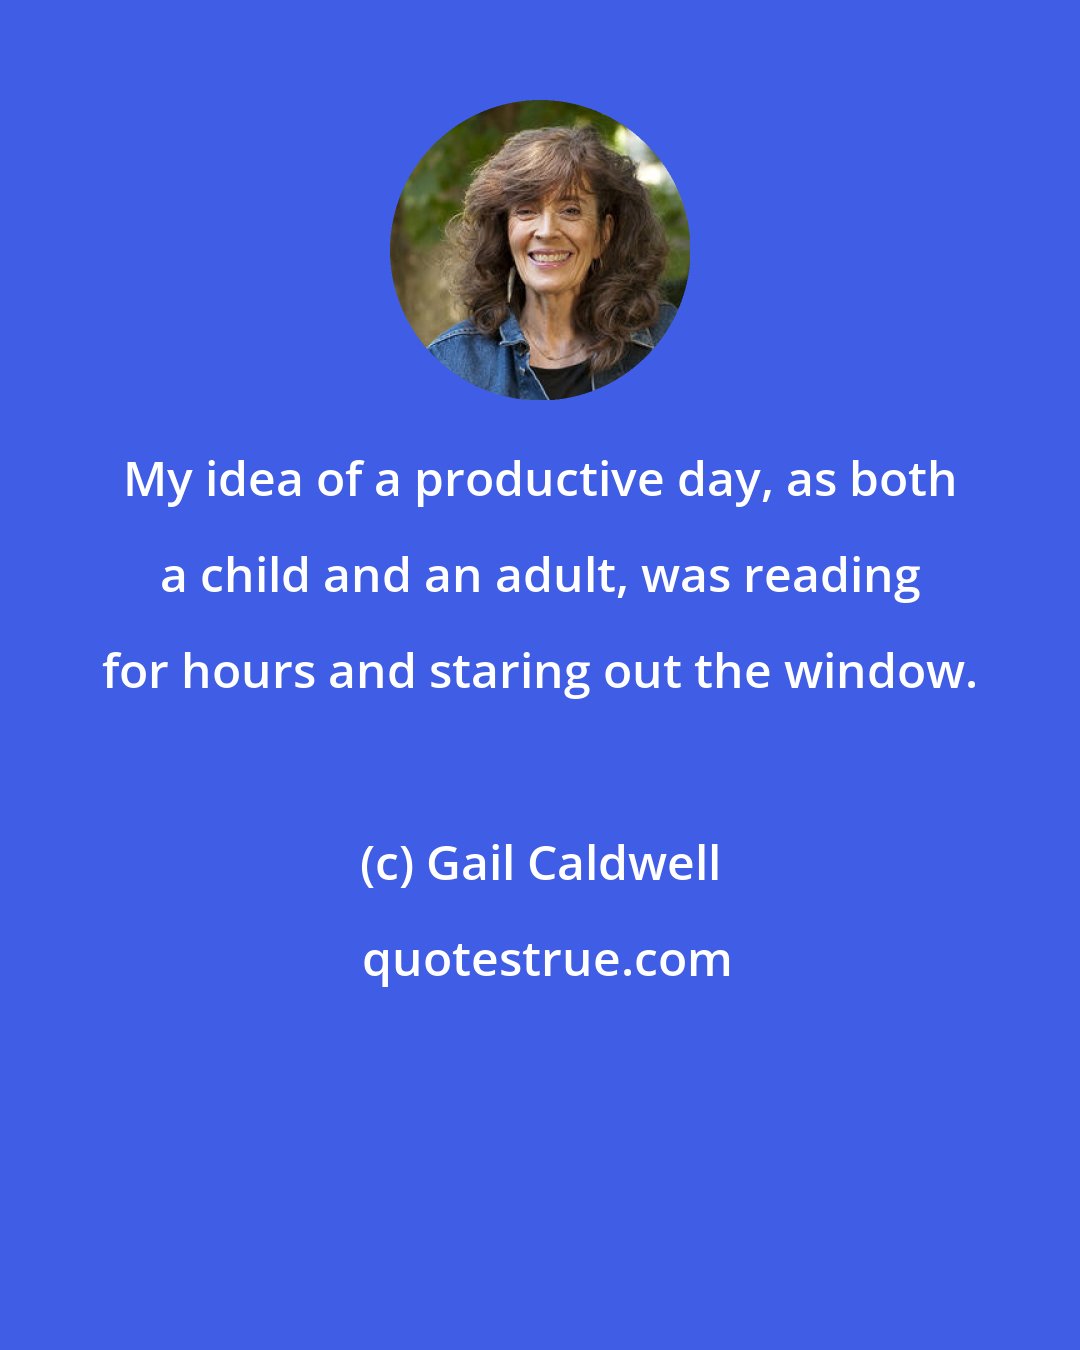 Gail Caldwell: My idea of a productive day, as both a child and an adult, was reading for hours and staring out the window.